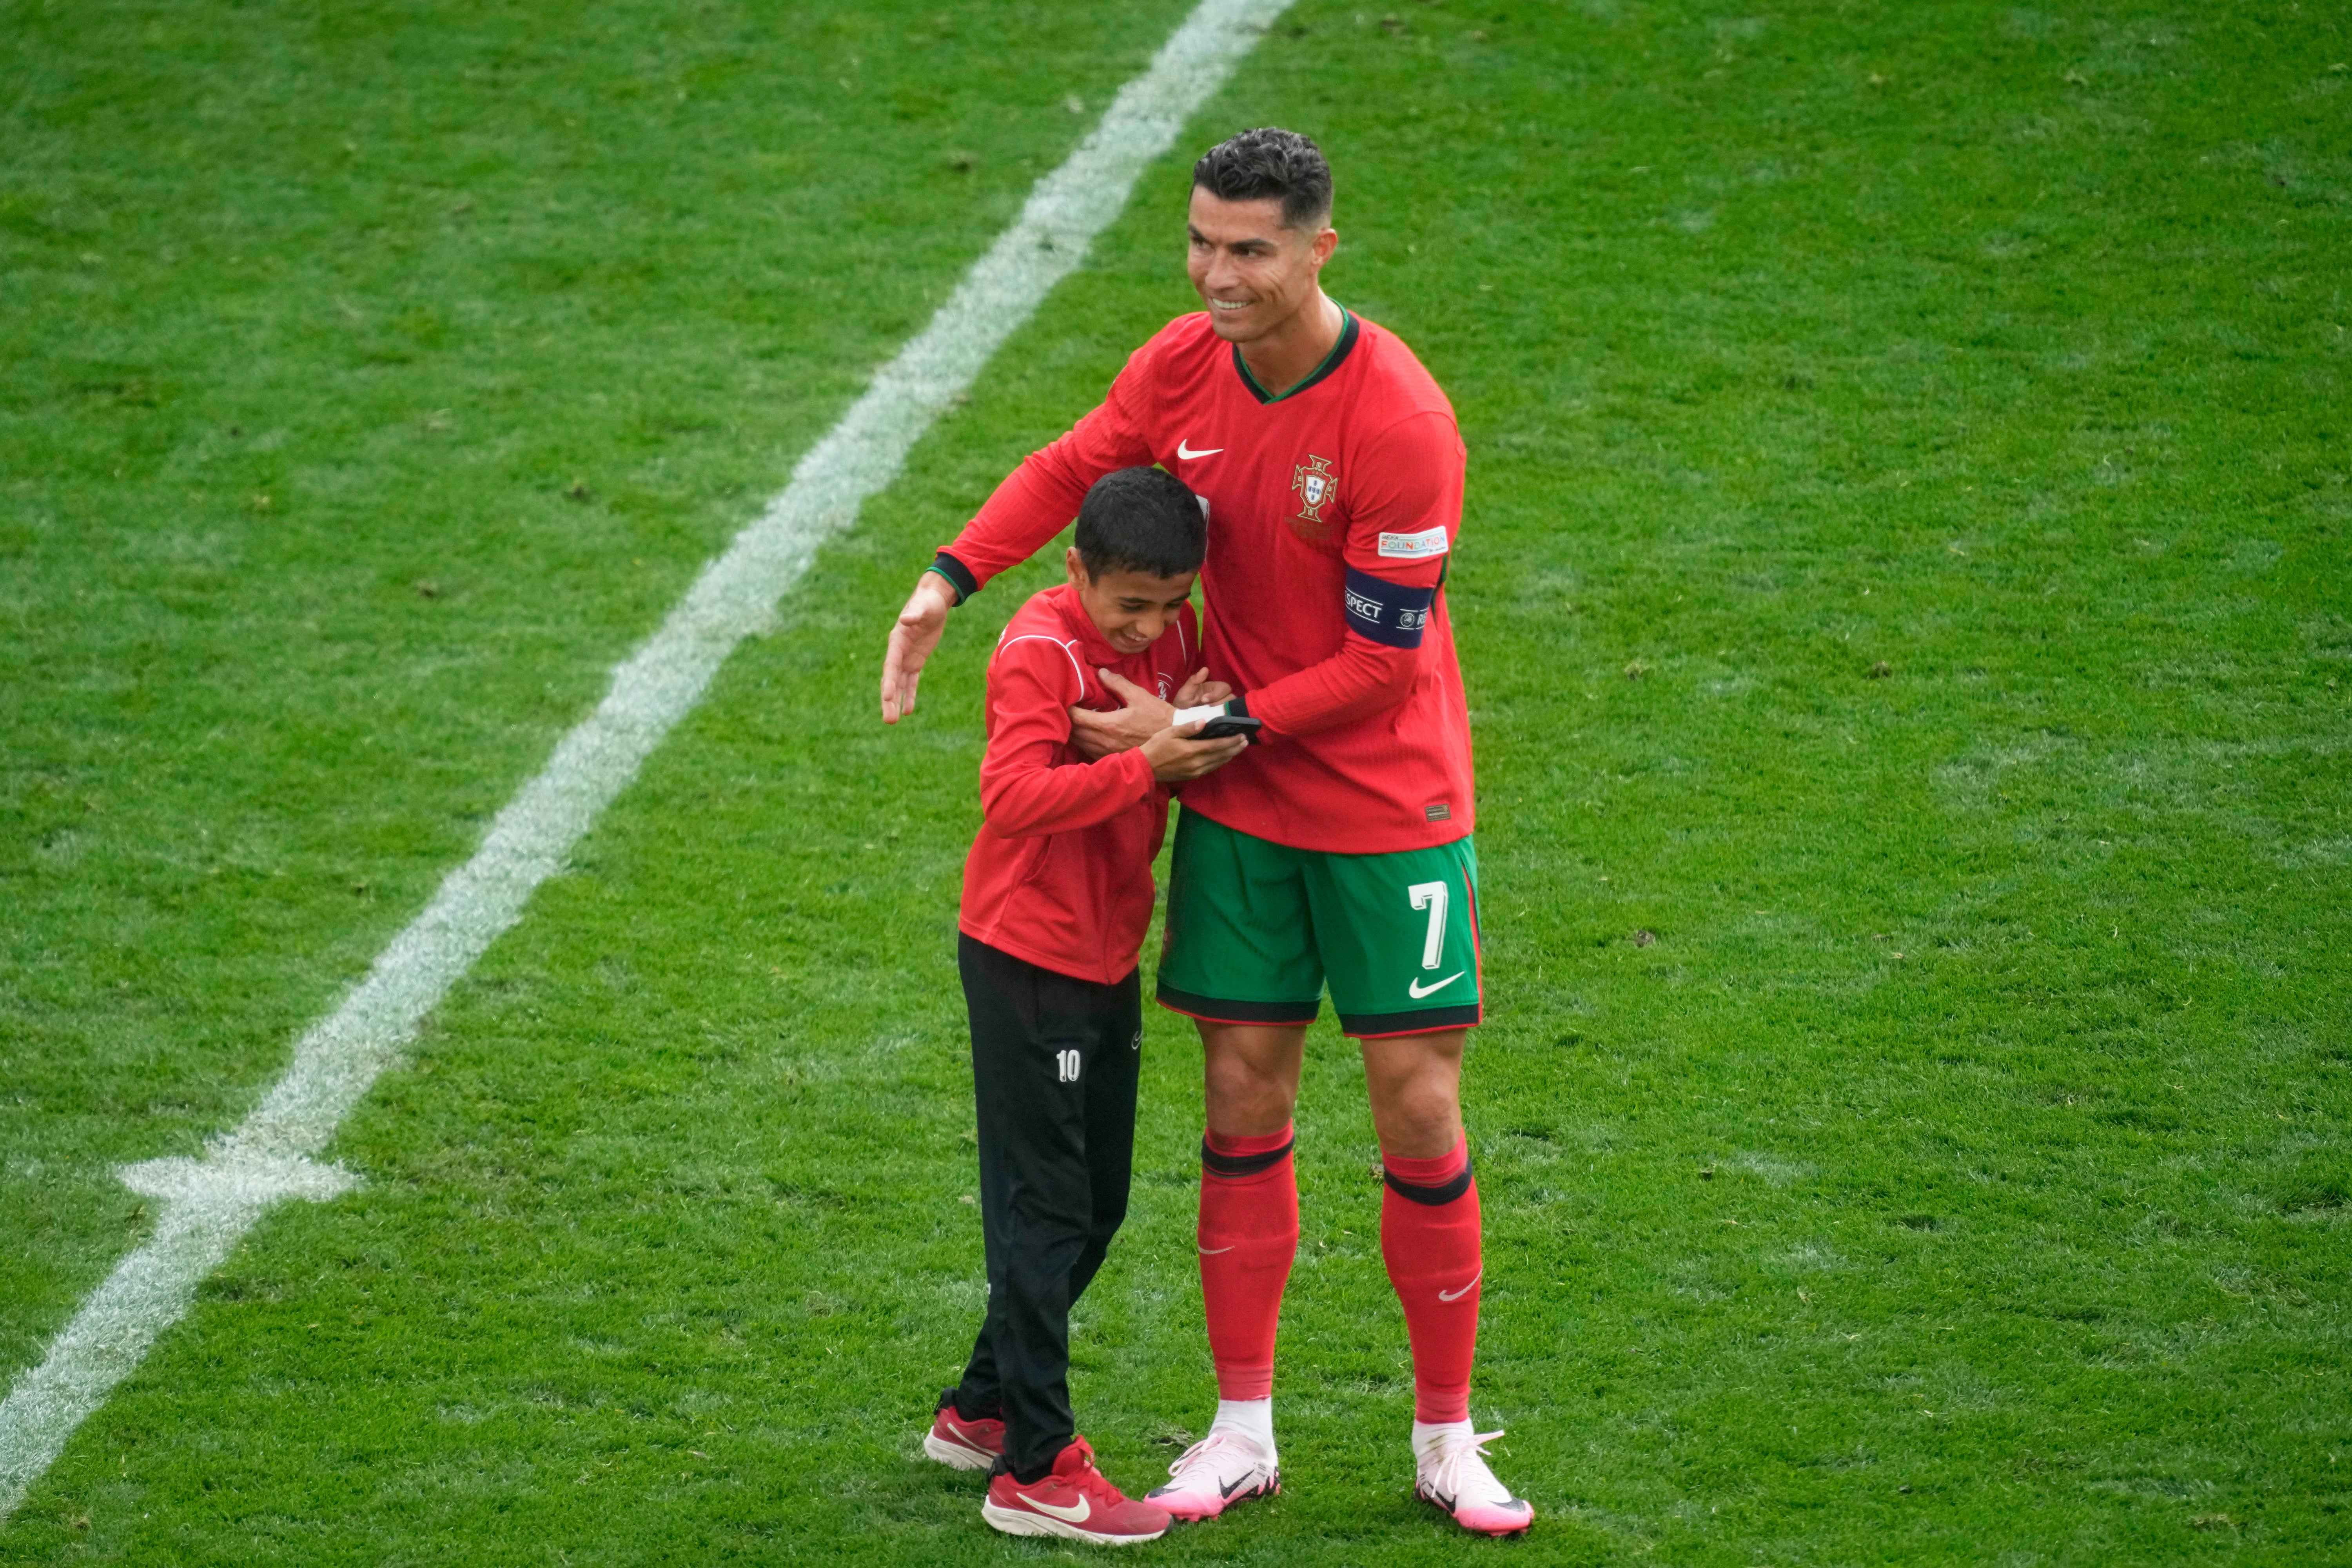 Ronaldo was targeted by half a dozen pitch invaders